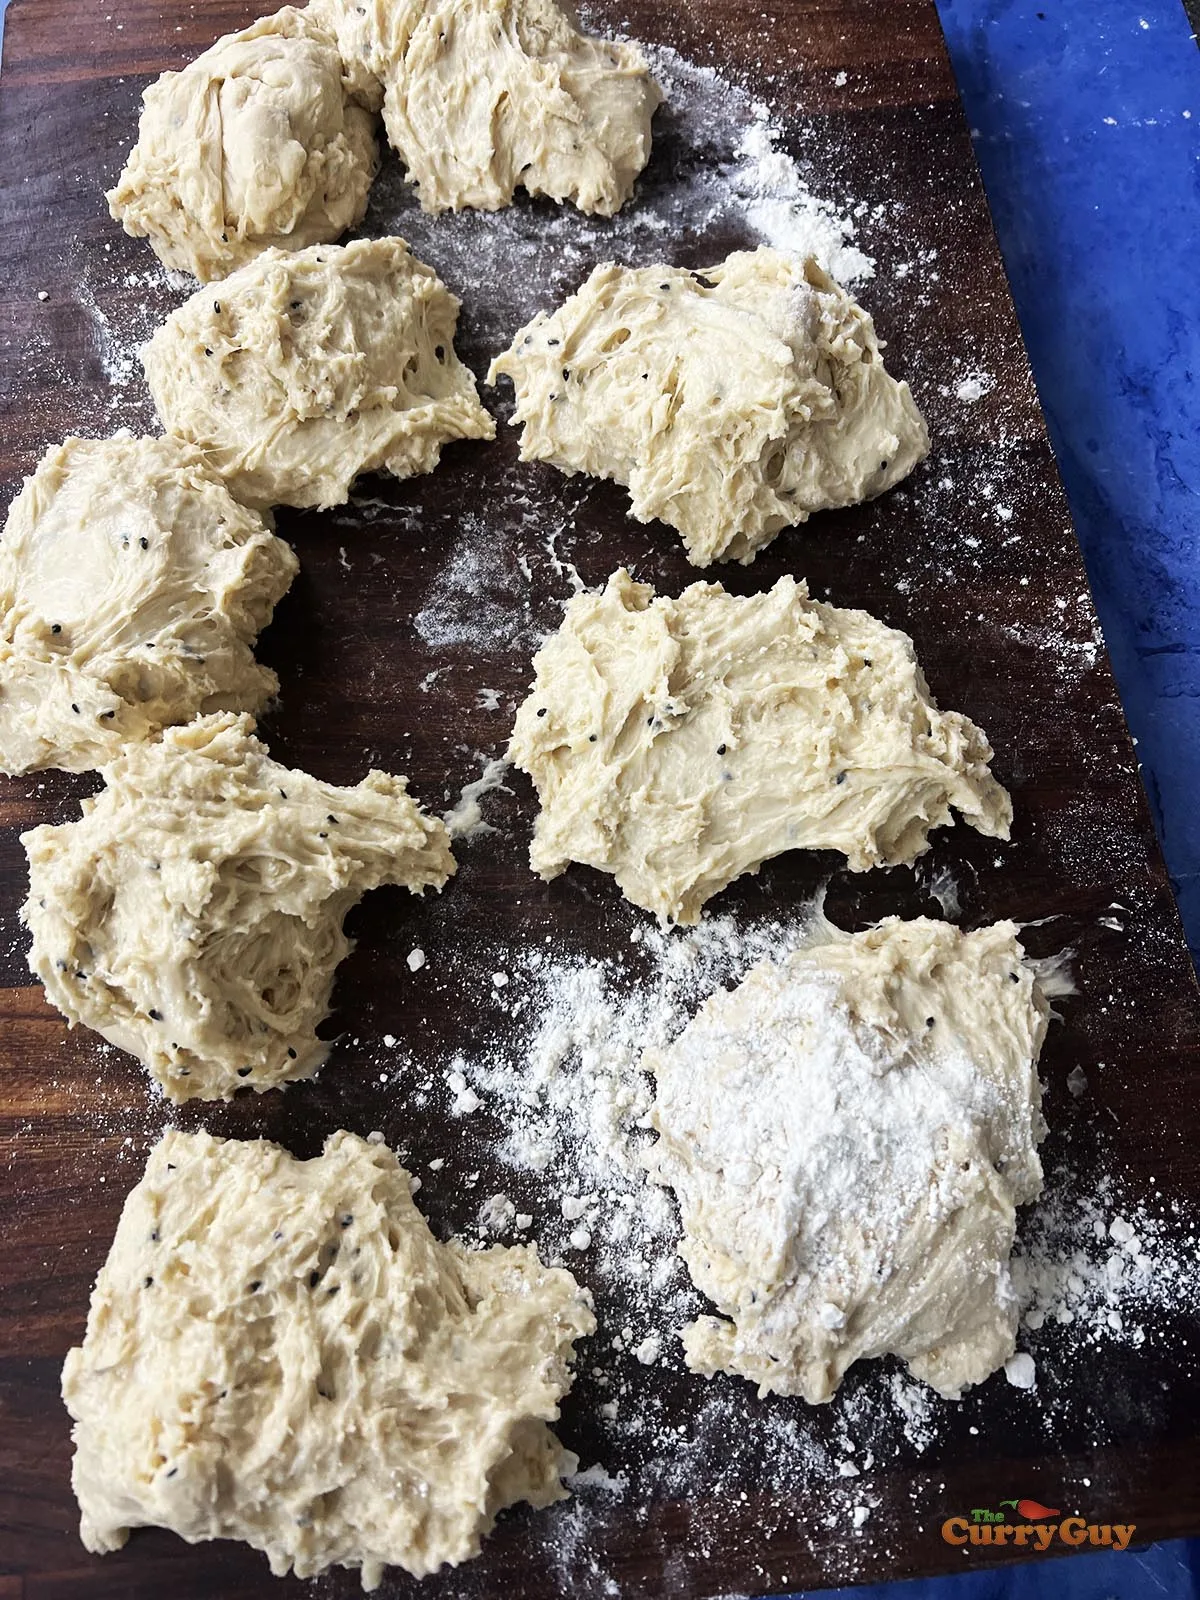 Dough clumps ready for working.